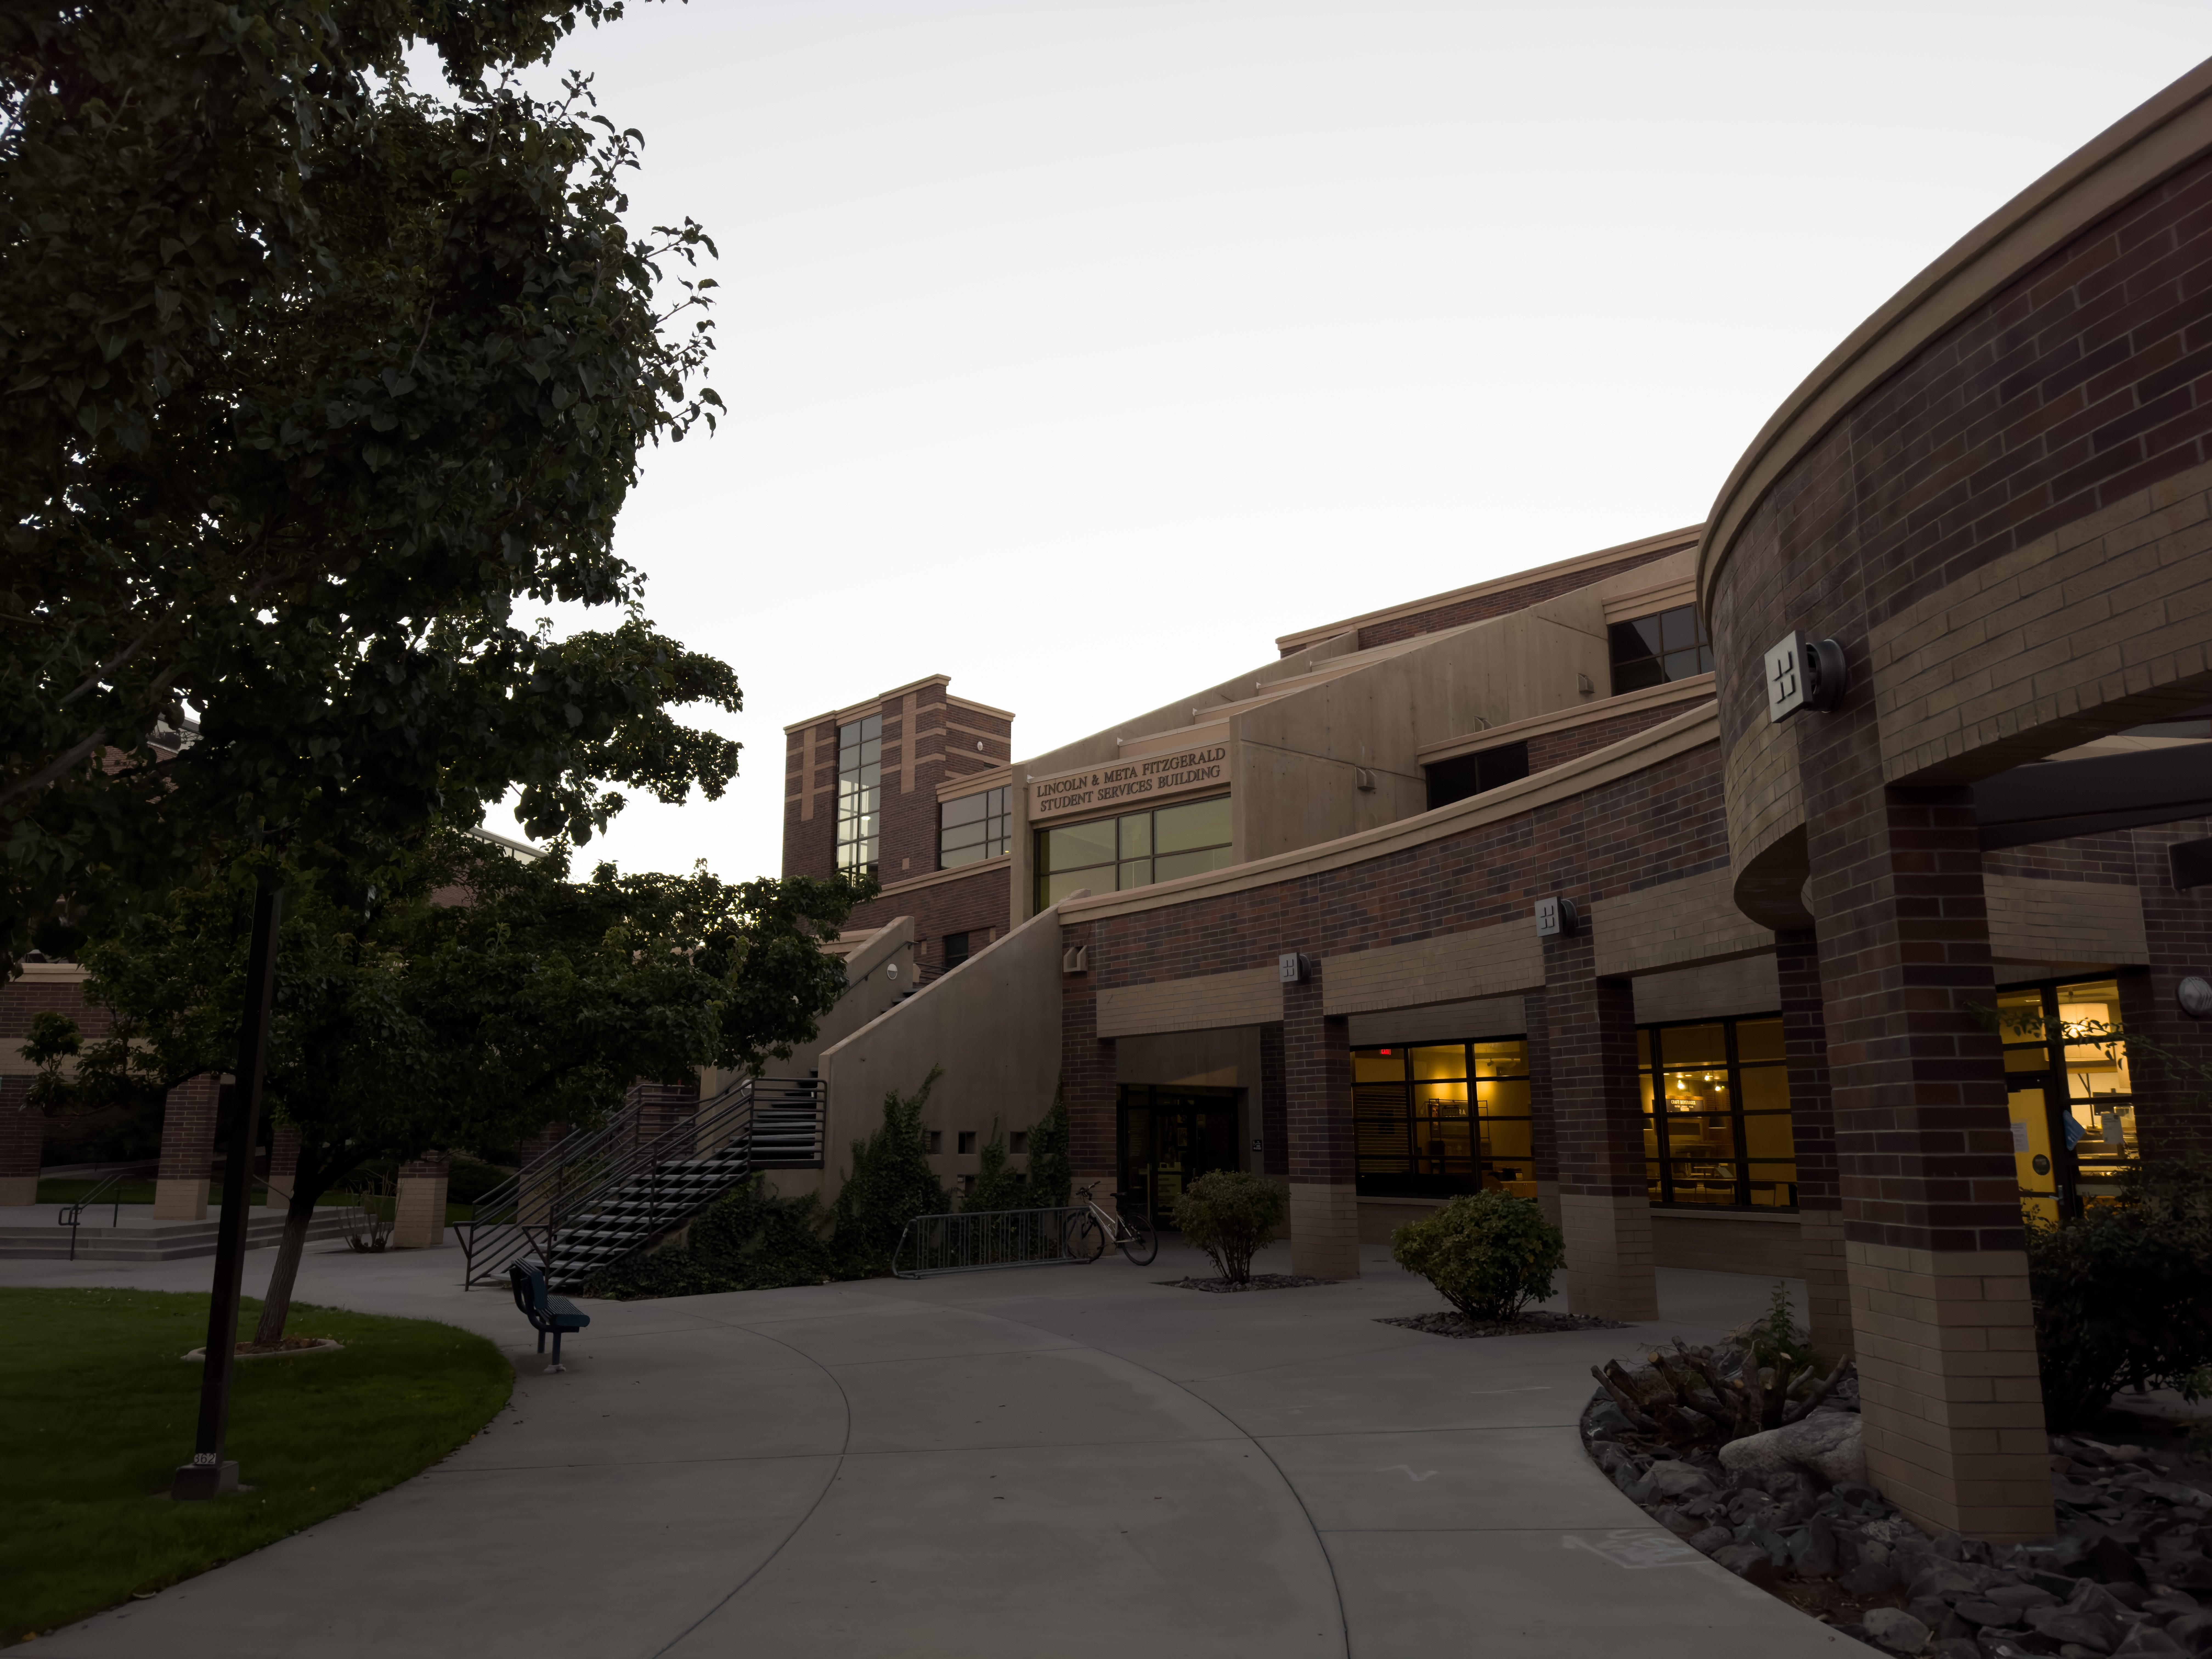 Part 1: What’s going on with UNR’s budget? Hiring freeze and COLAs explained